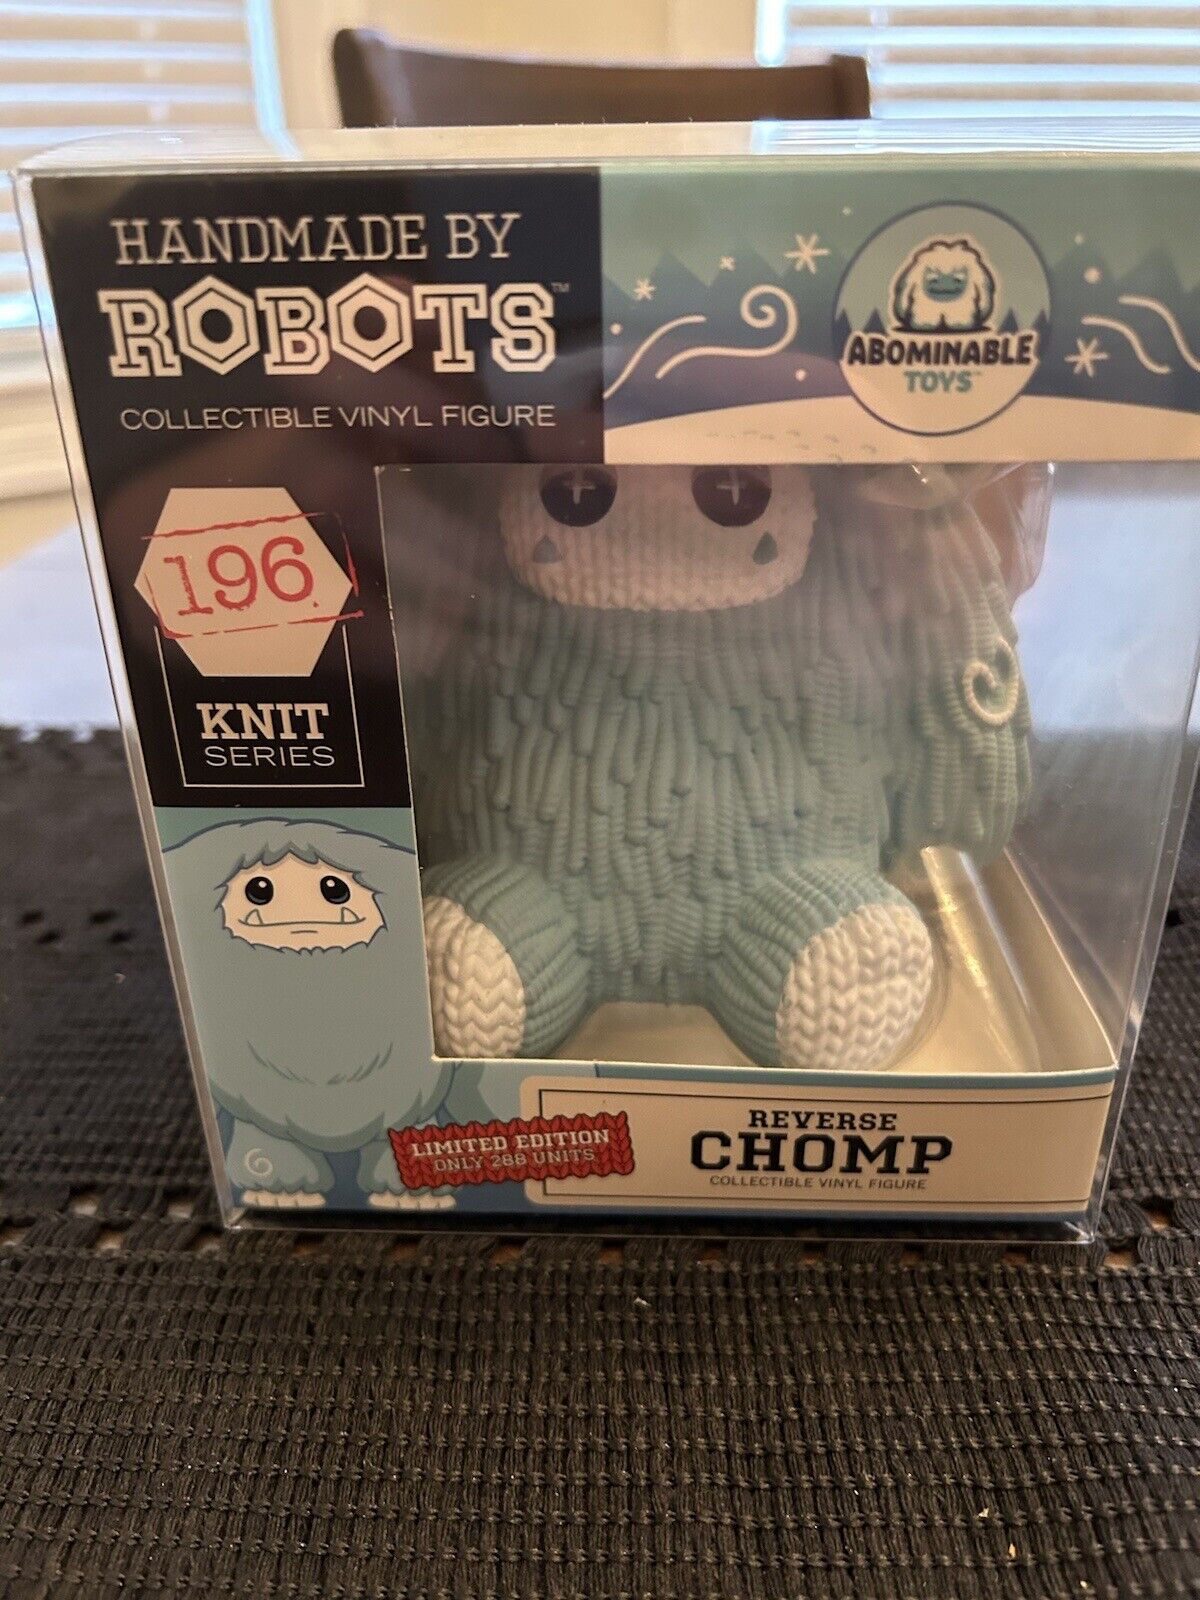 Abominable Toys HMBR limited edition reverse chomp # 196- 288 units